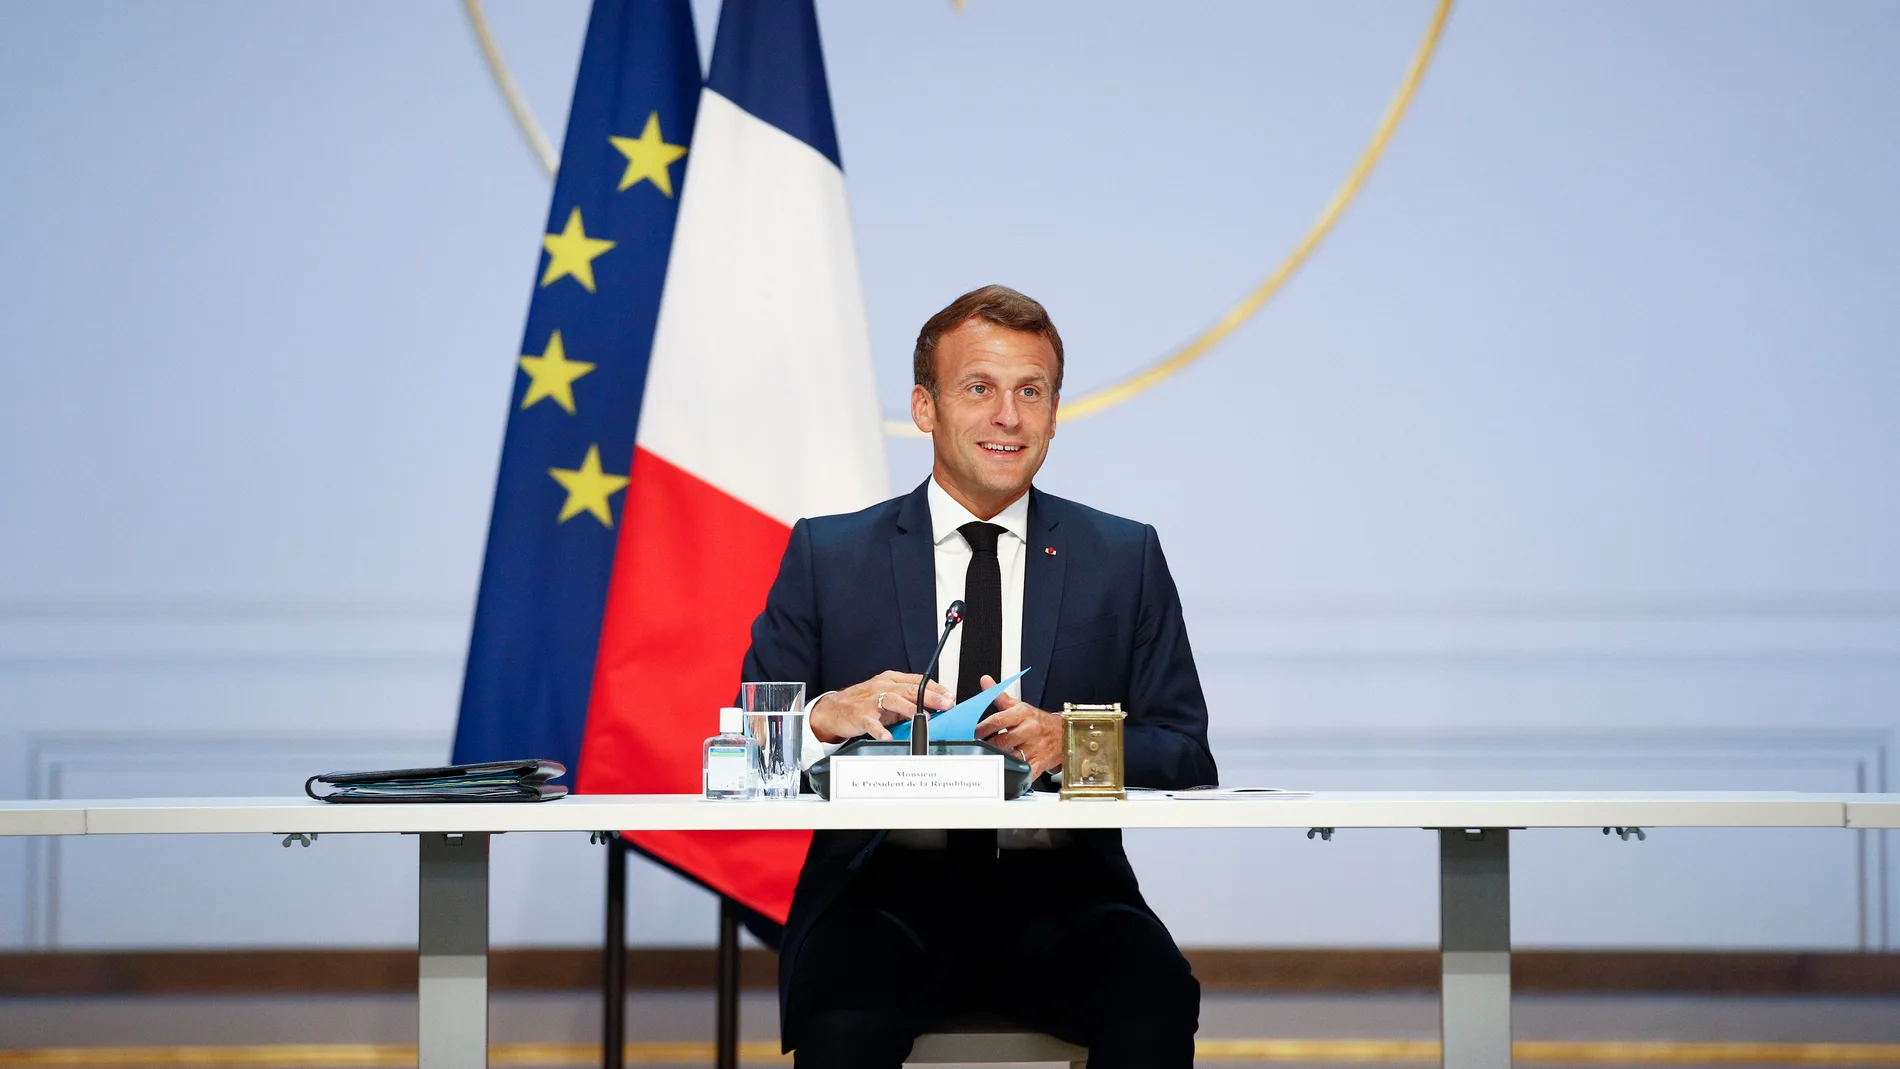 President Macron meets with French Unions in Paris